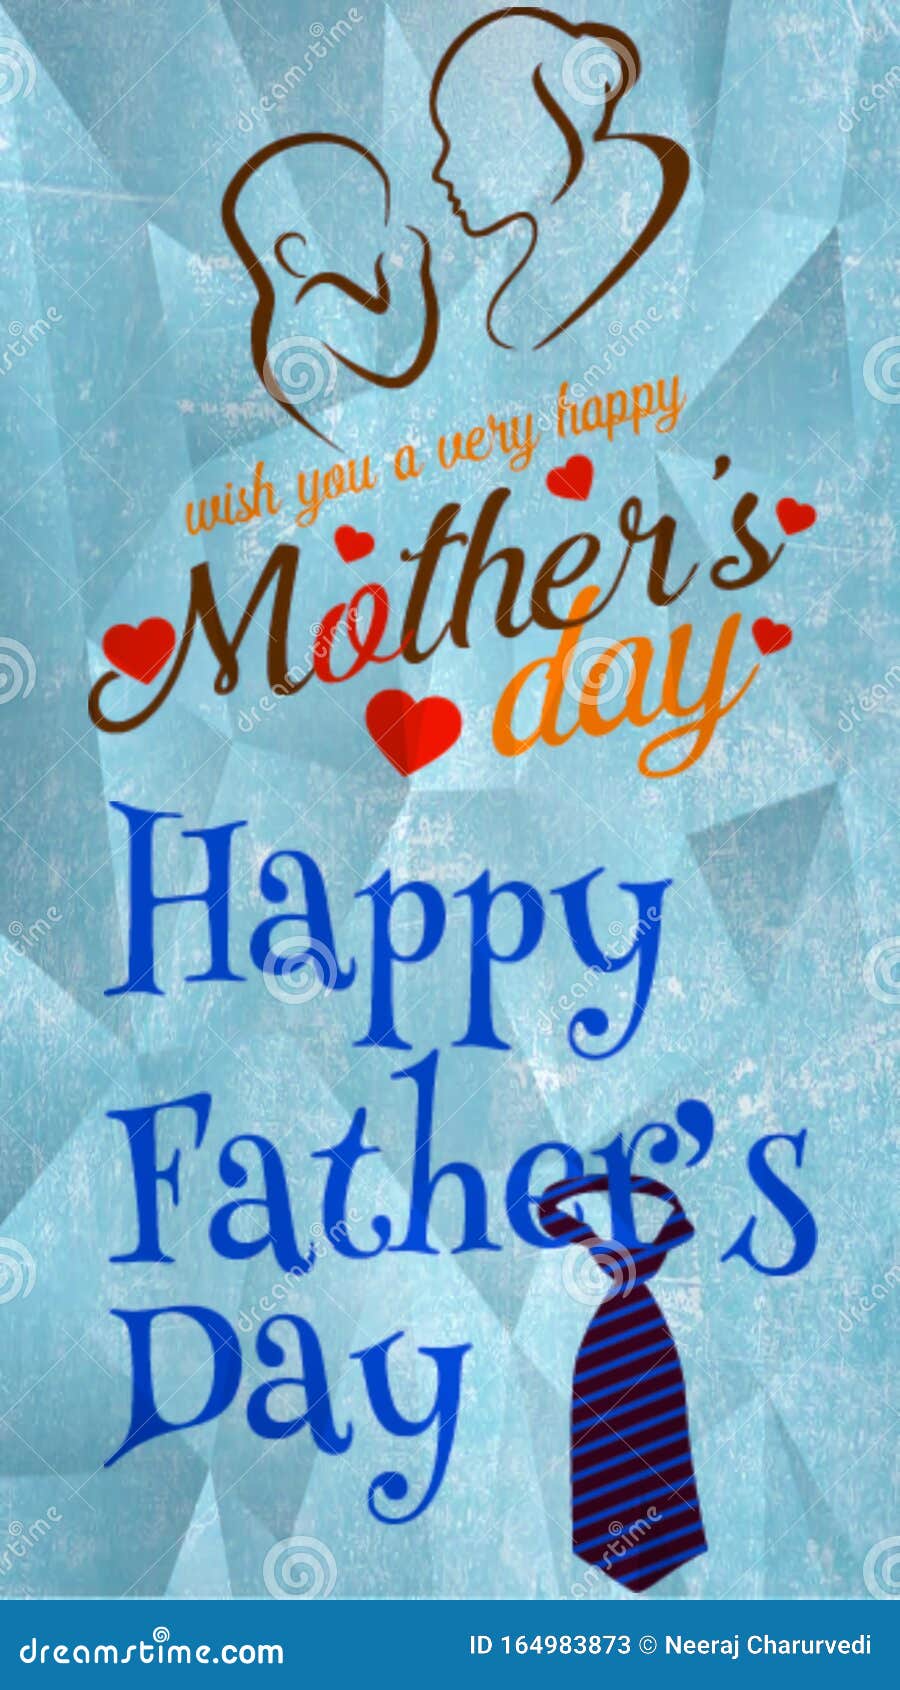 Mothers Day and Fathers Day with Happy Greetings Words Displaying on